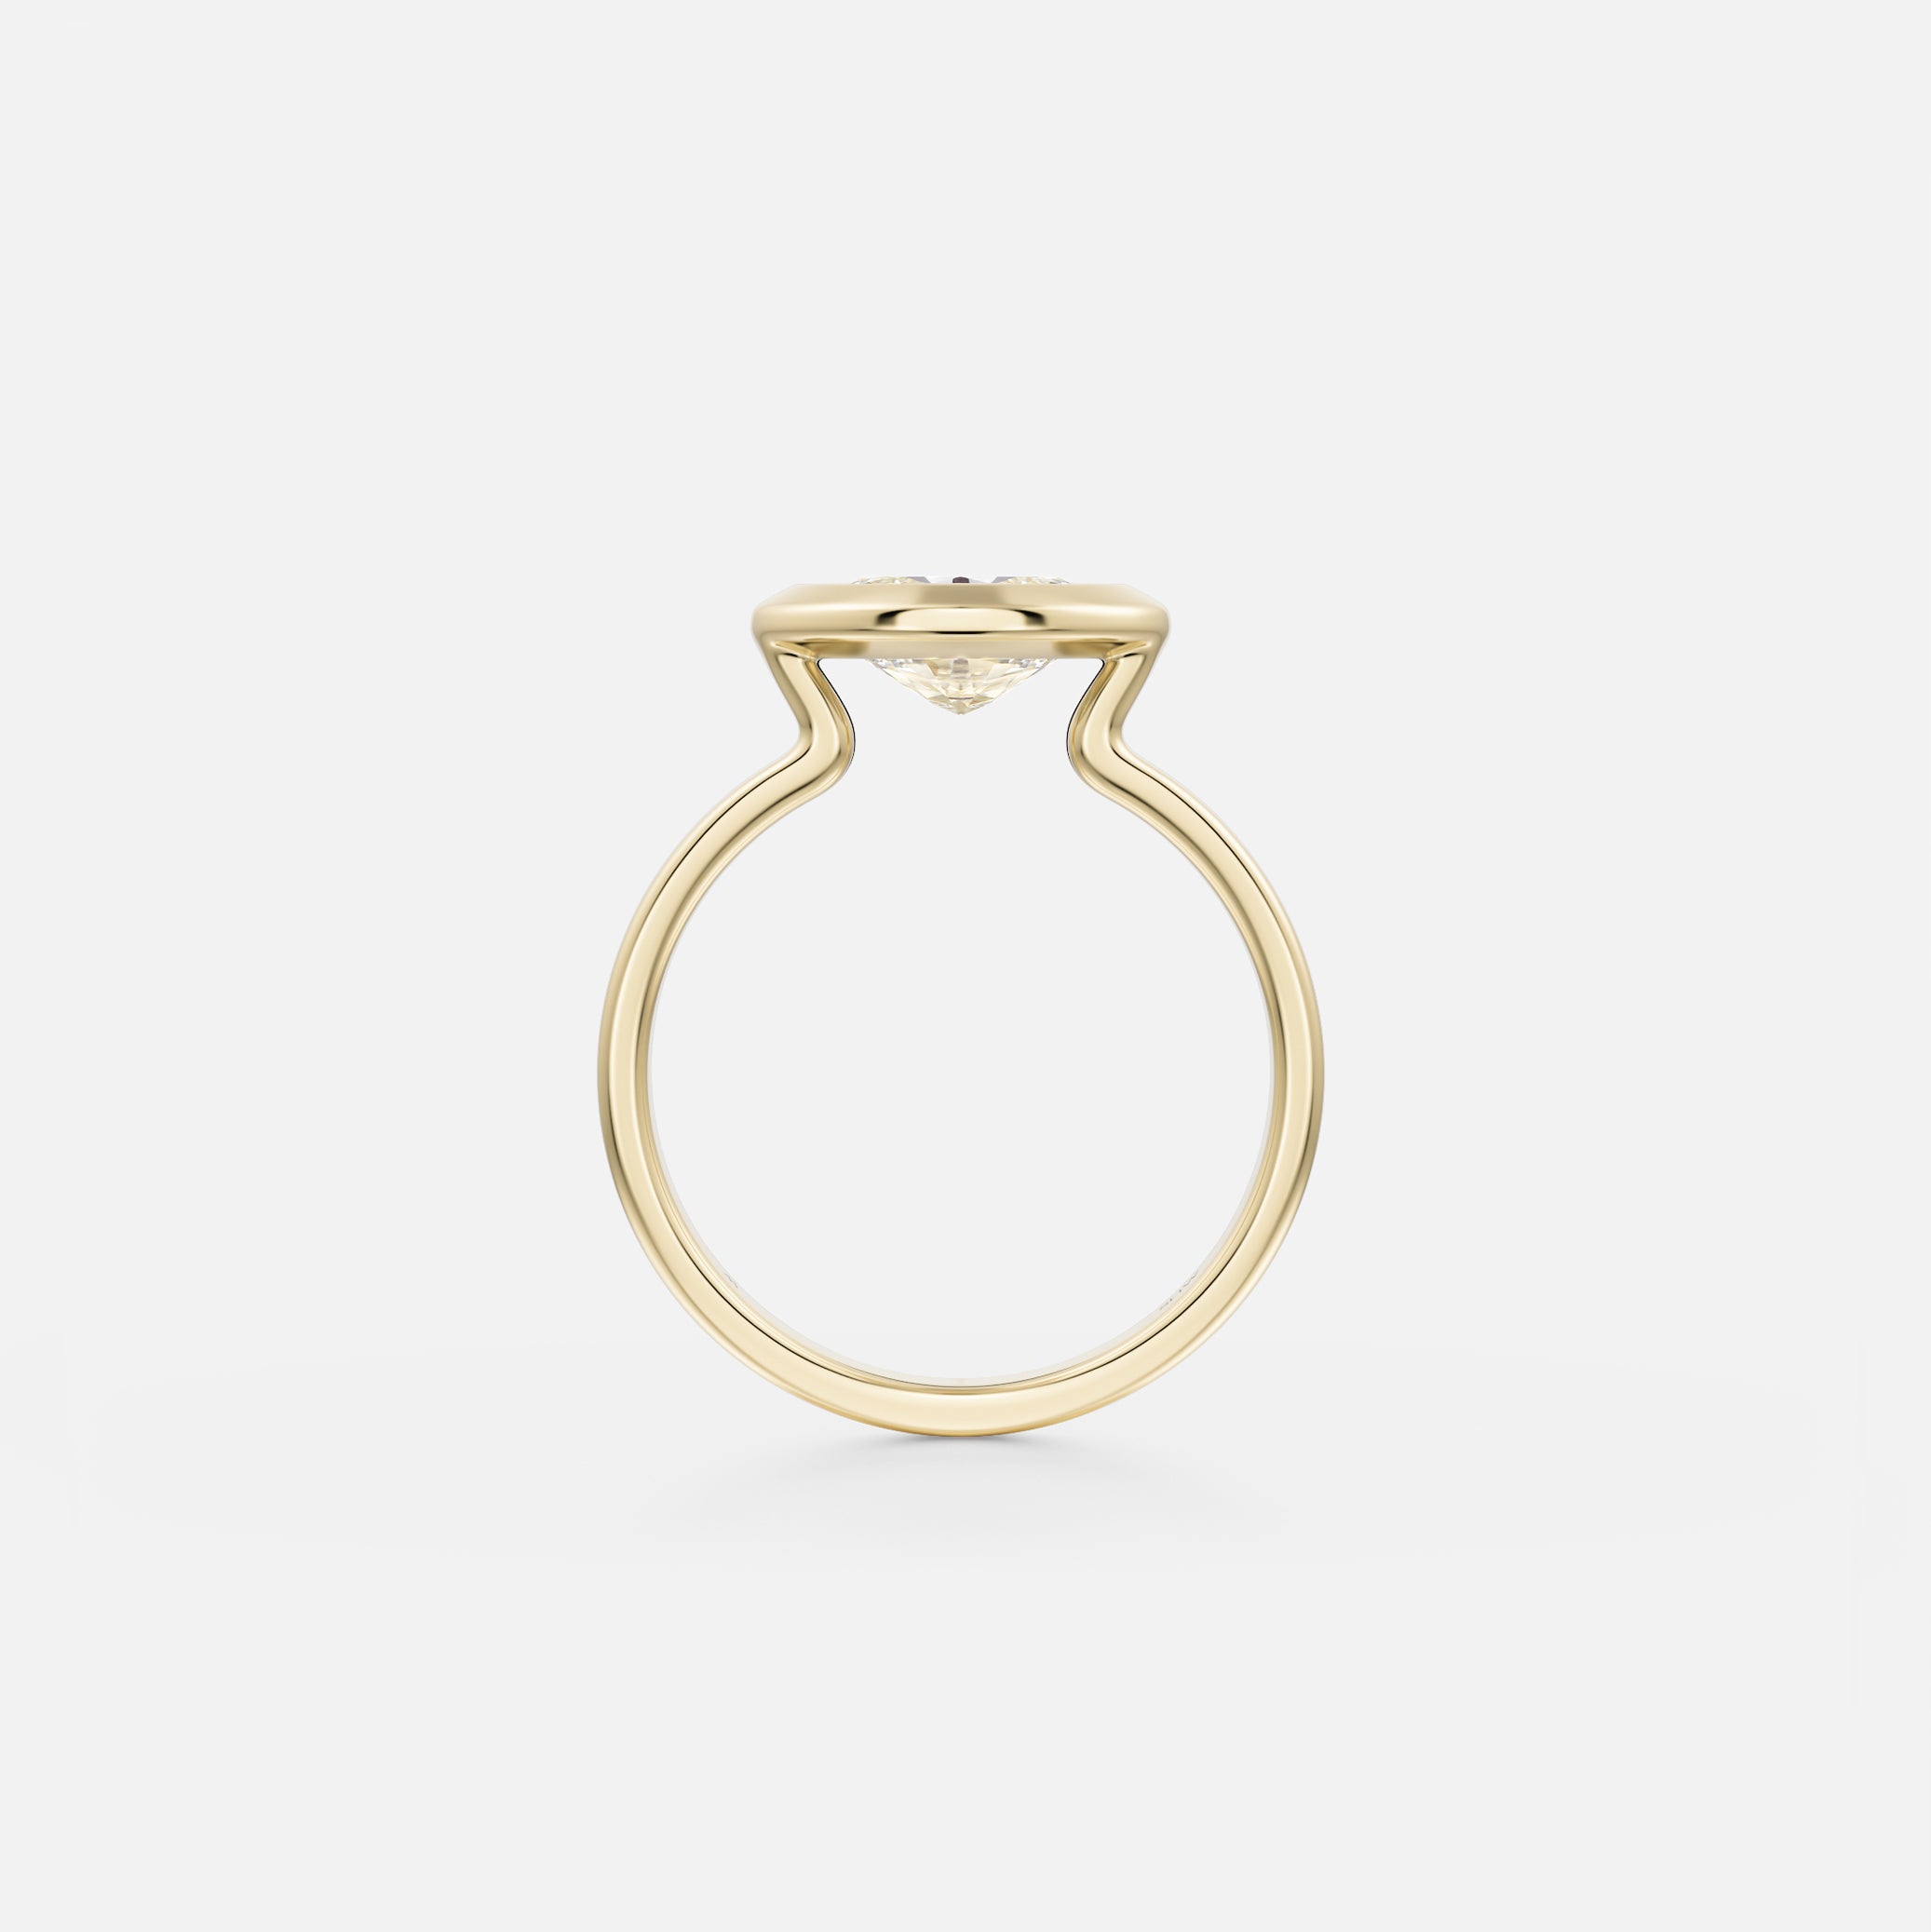 Vilke Flat Band with East West Oval Contemporary Engagement Ring Sculptural Bezel Setting in sustainable recycled 14k Gold or platinum by SHW Fine Jewelry New York City